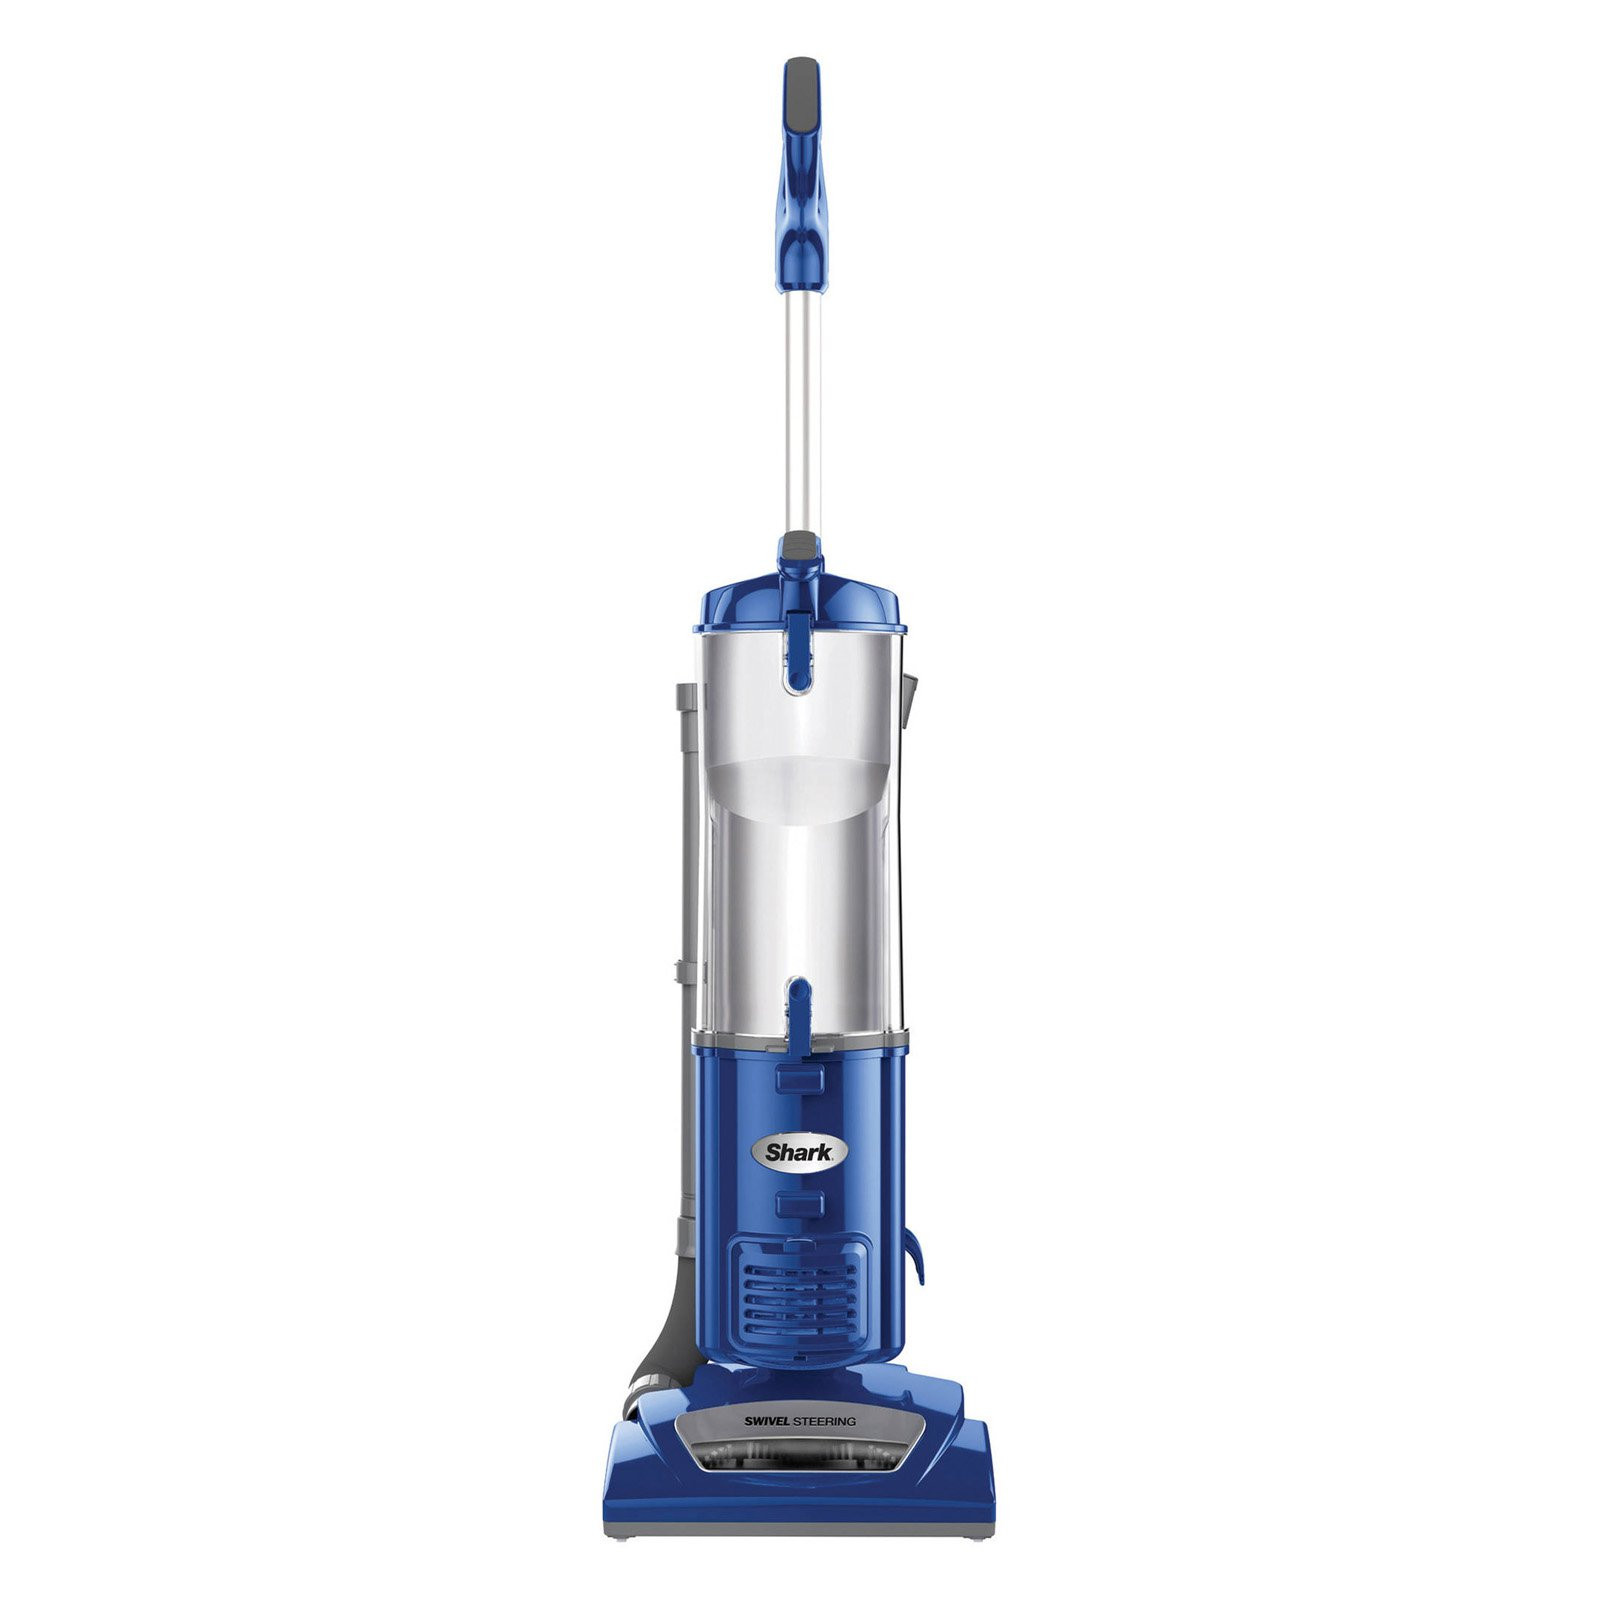 shark vacuum for pet hair and hardwood floors of shark attachments compare prices on gosale com pertaining to shark nv46 navigator swivel plus upright vacuum